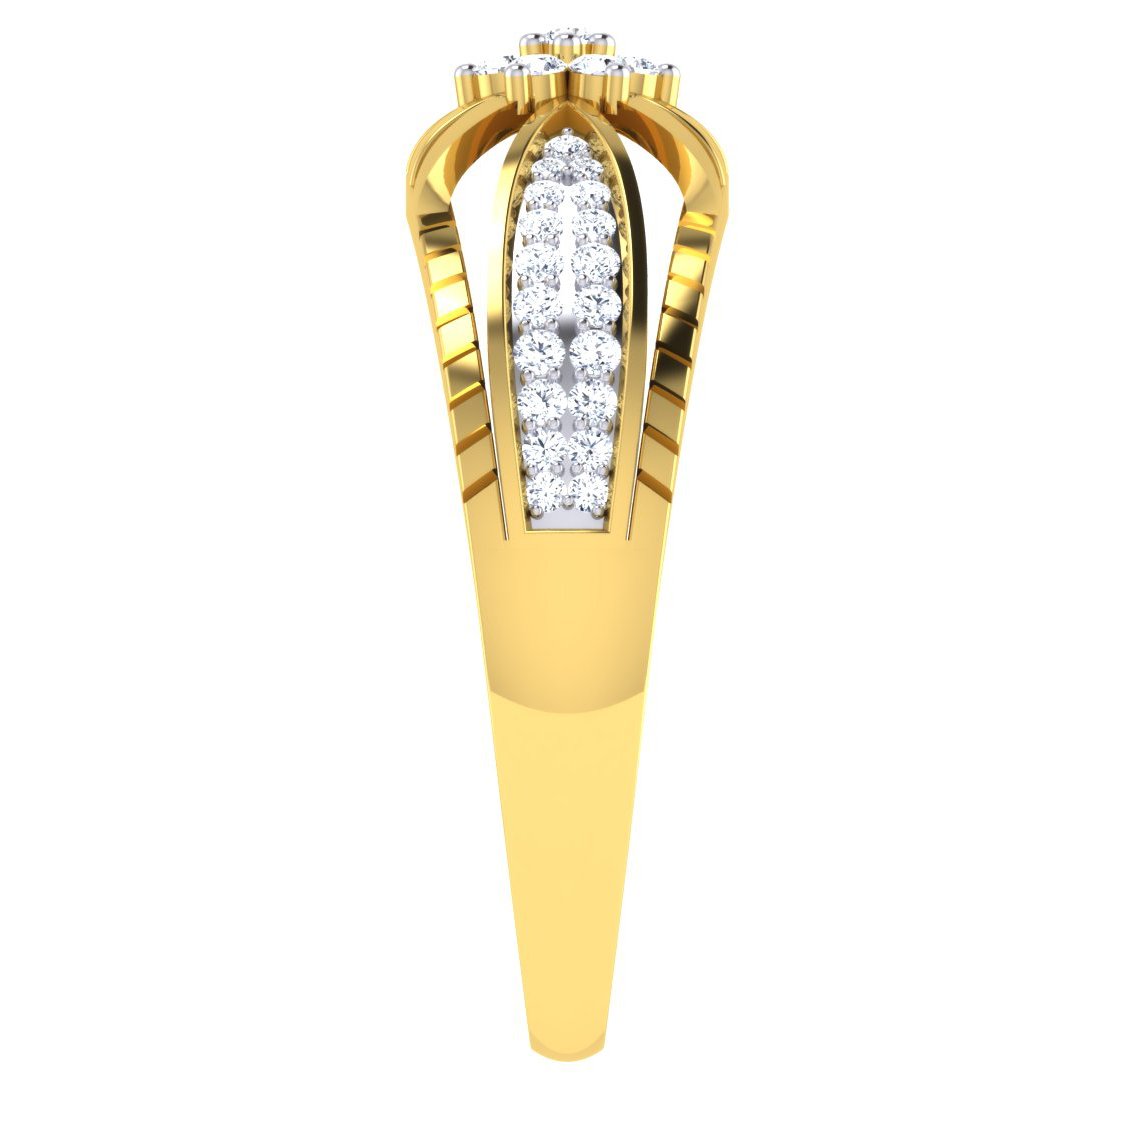 Grand Diva Diamond Ring In Pure Gold By Dhanji Jewels